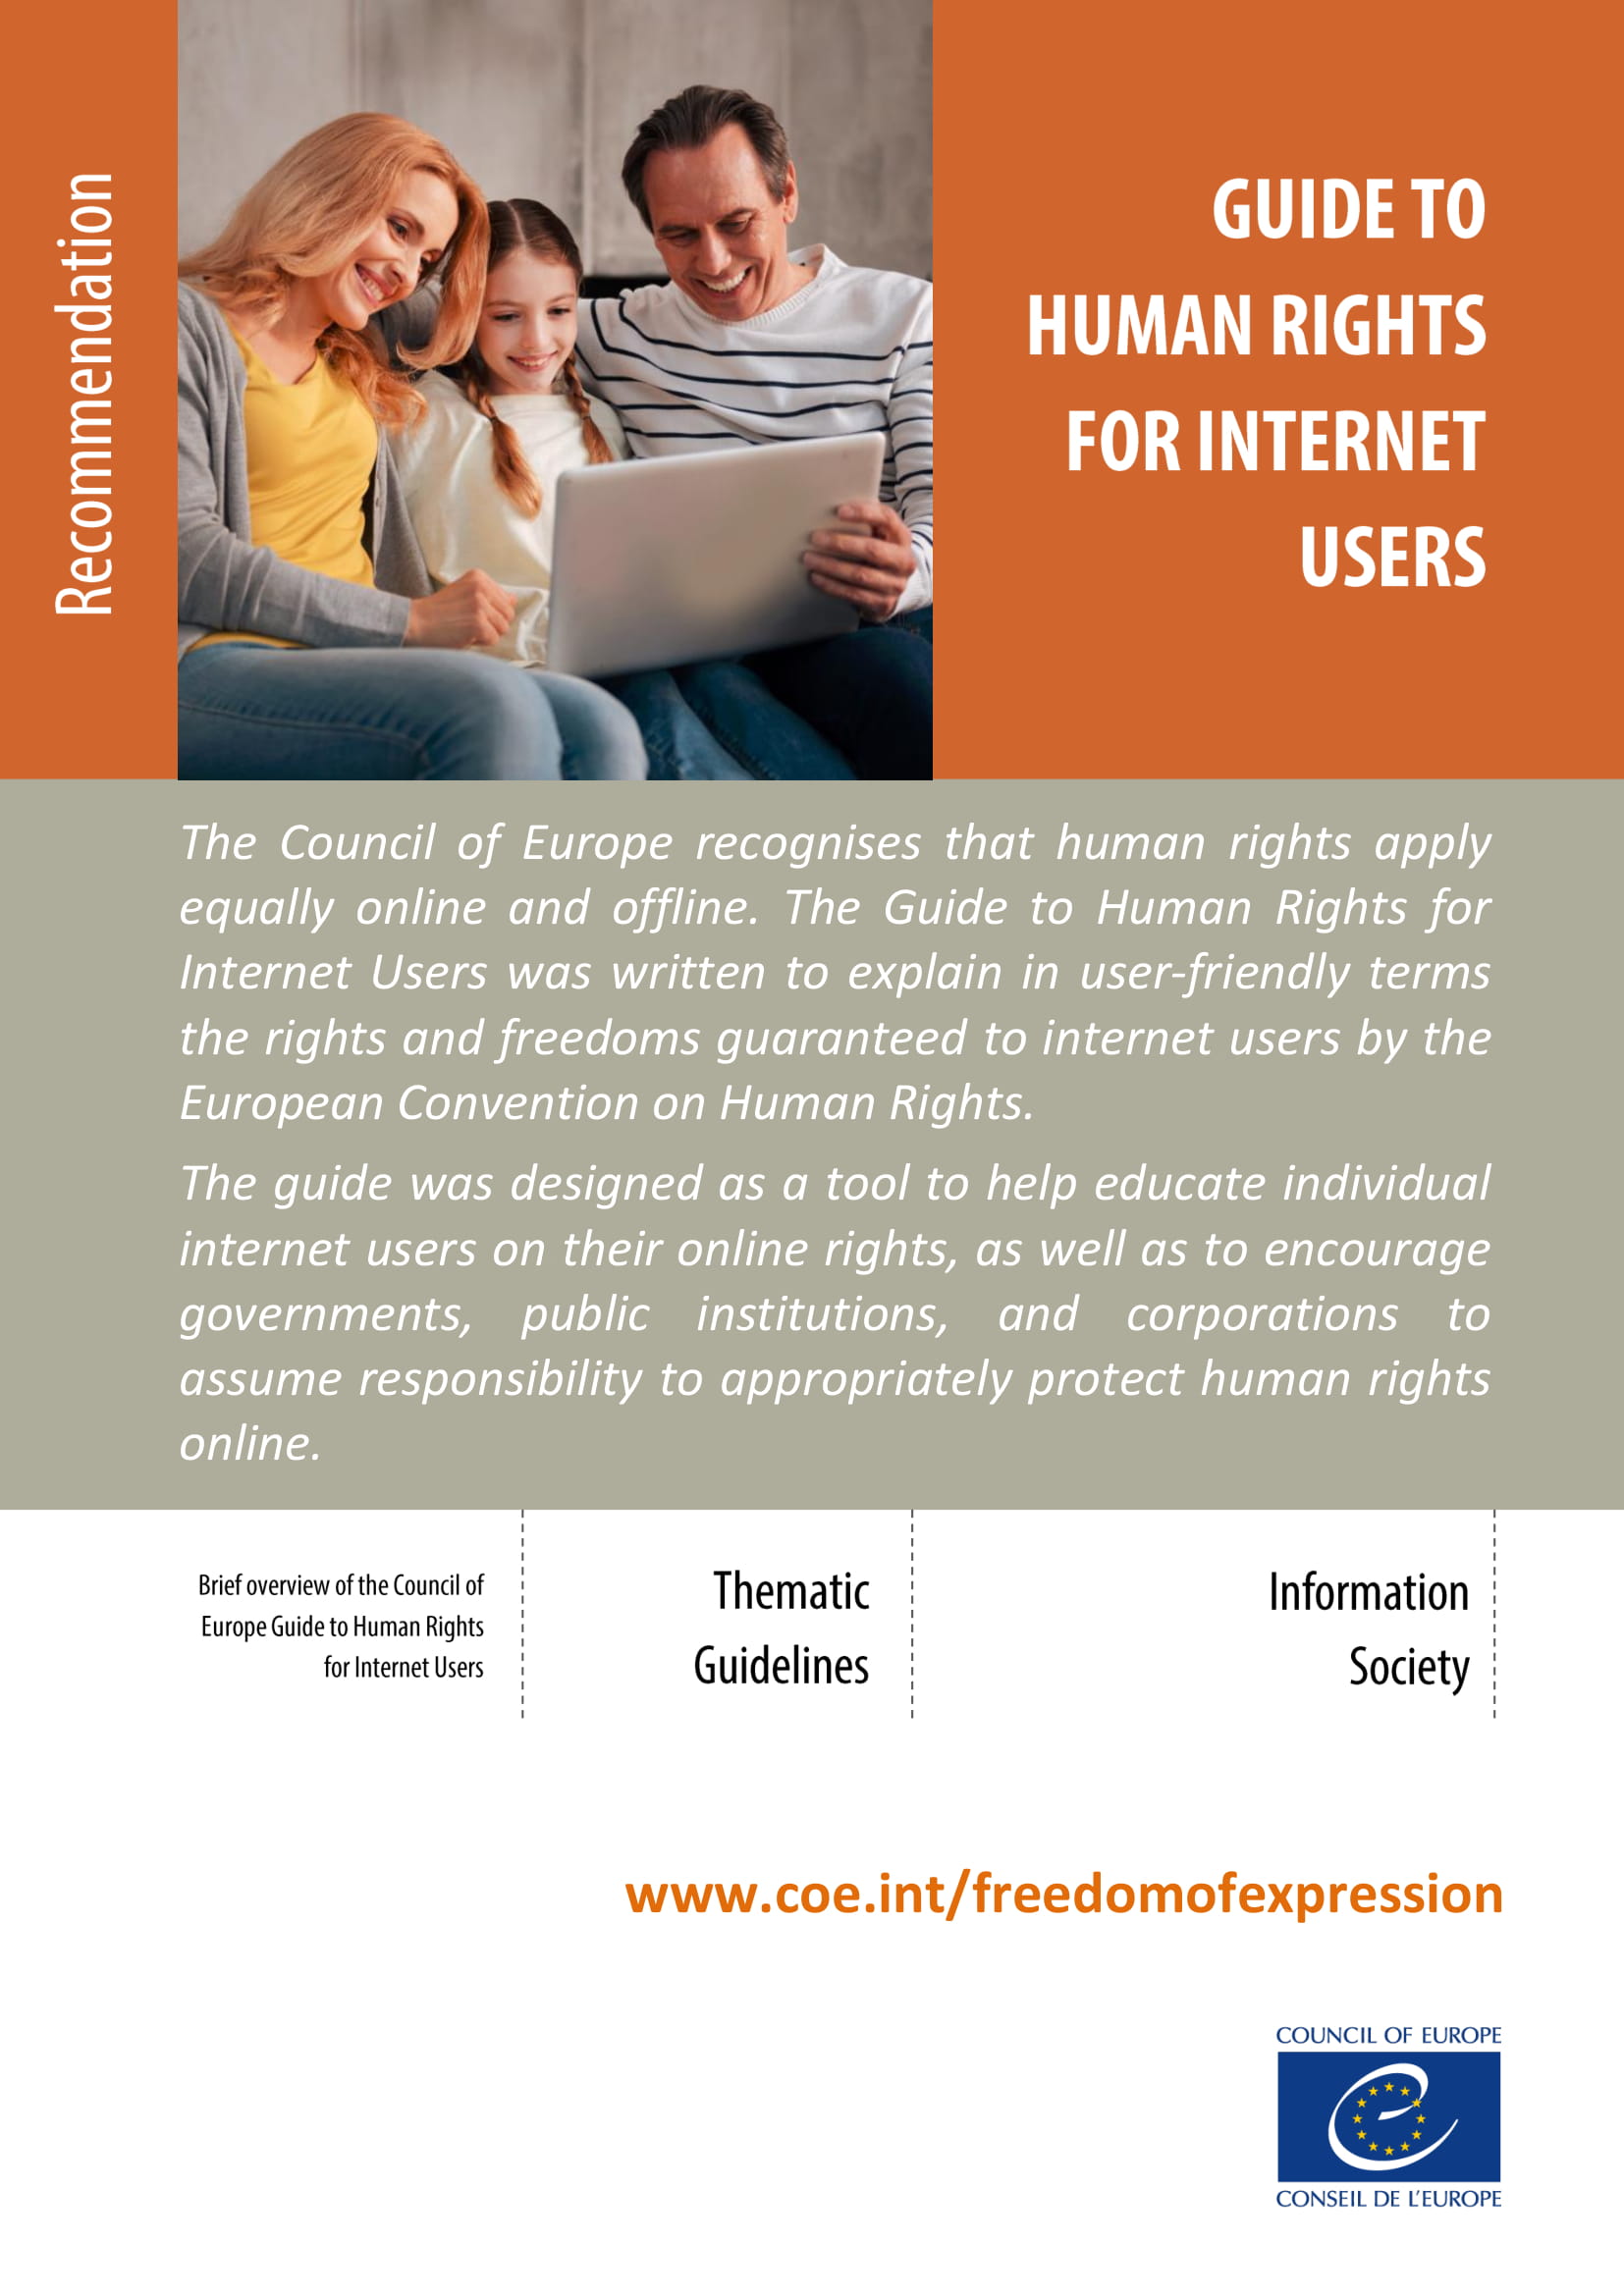 Guide to Human Rights for Internet Users